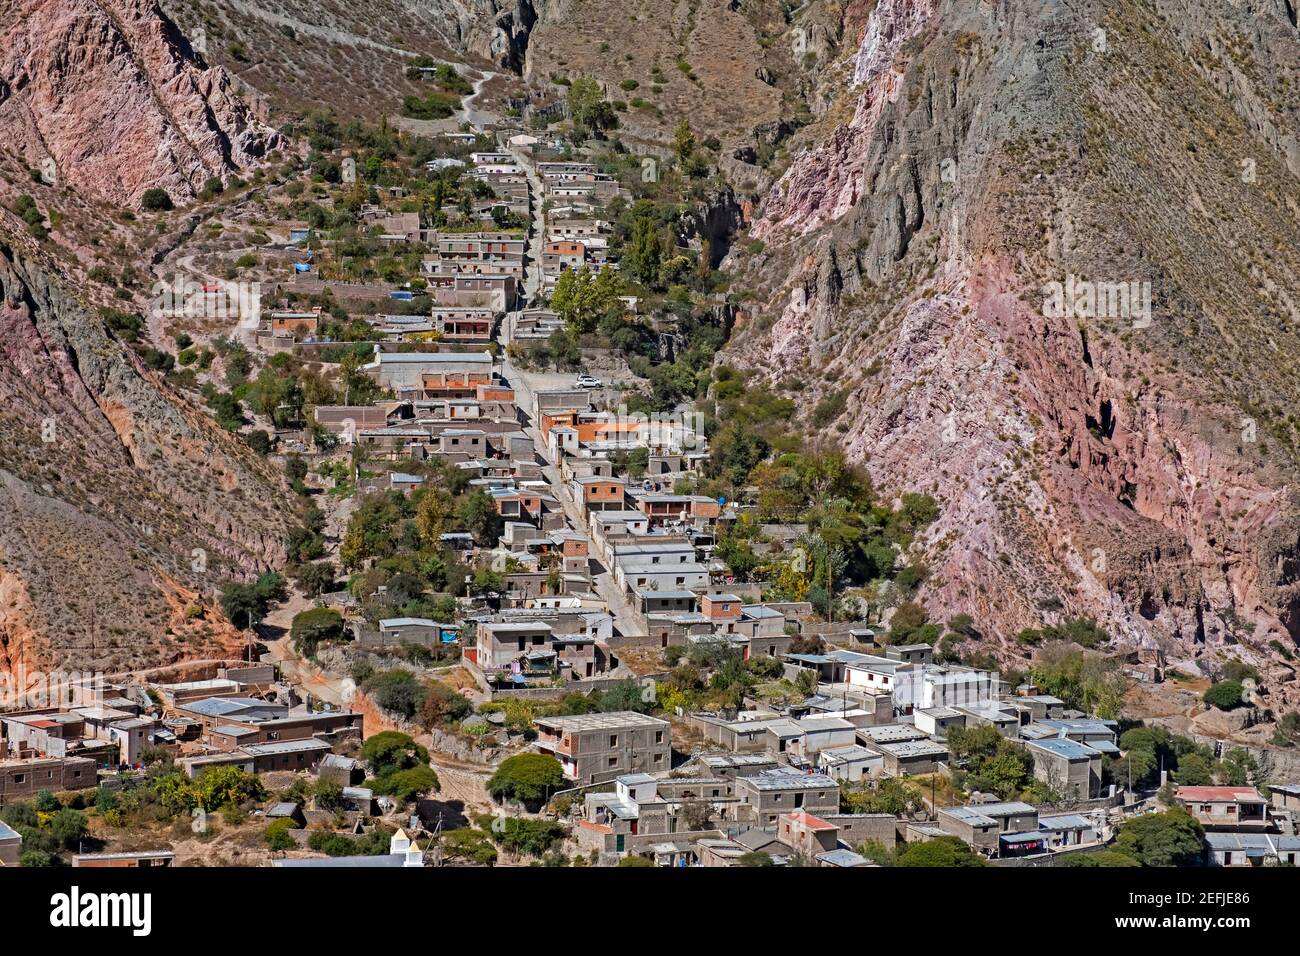 Aerial view over the village Iruya in the Altiplano region along the Iruya River, Salta Province of northwestern Argentina Stock Photo